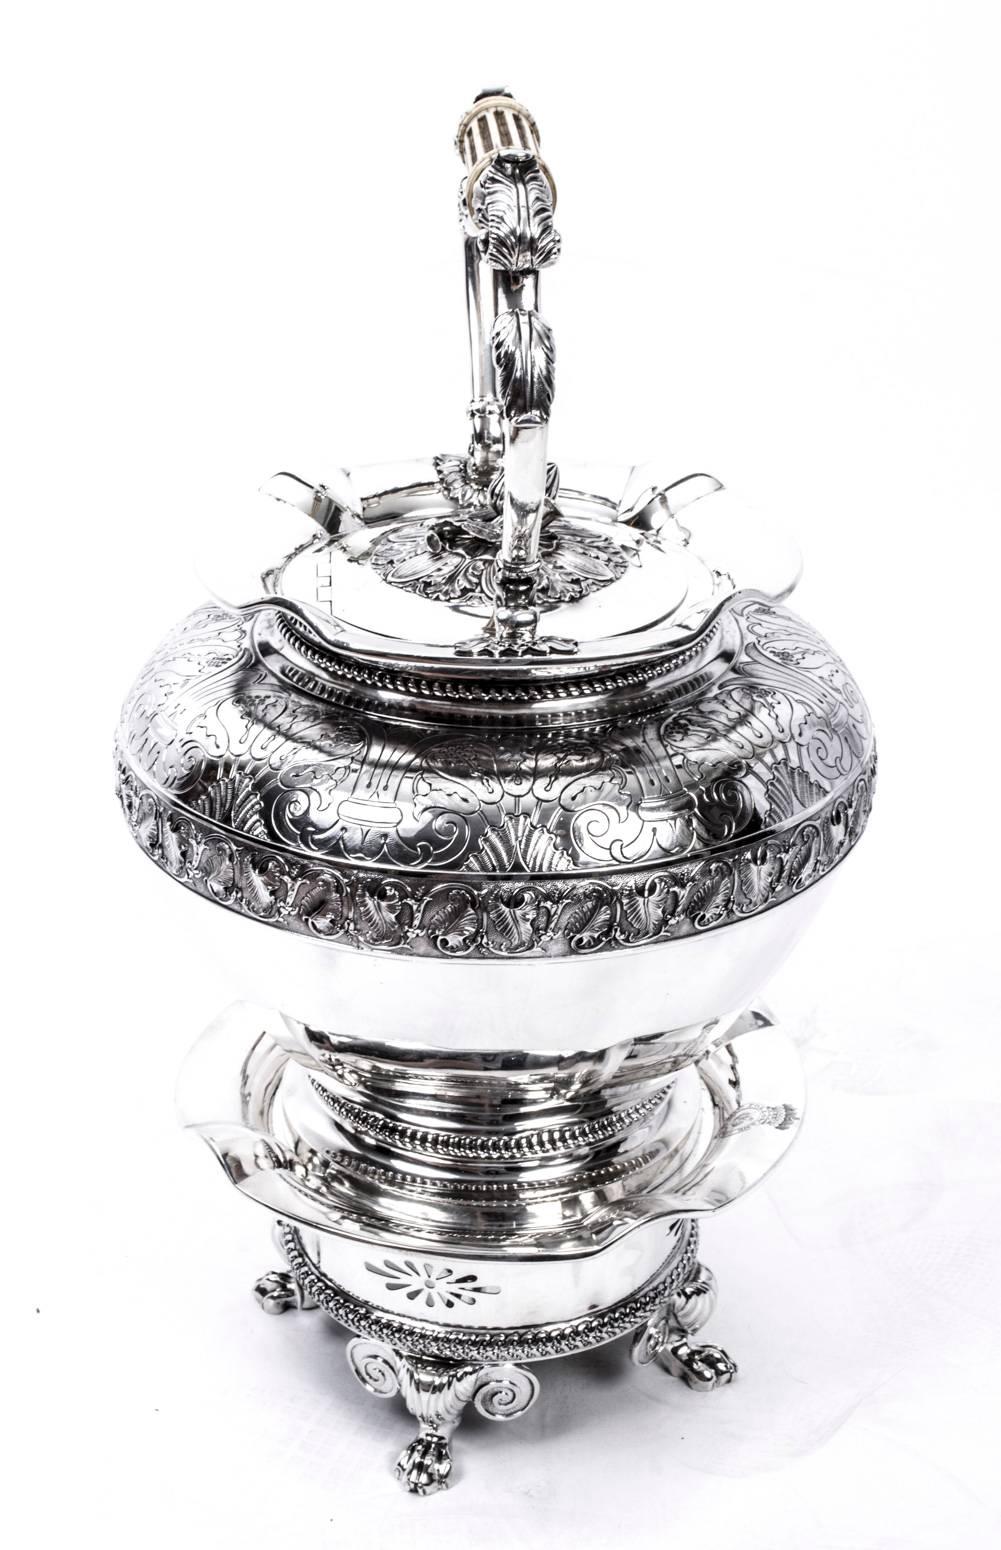 English Antique Sterling Silver Kettle on Stand John Bridge, 1825